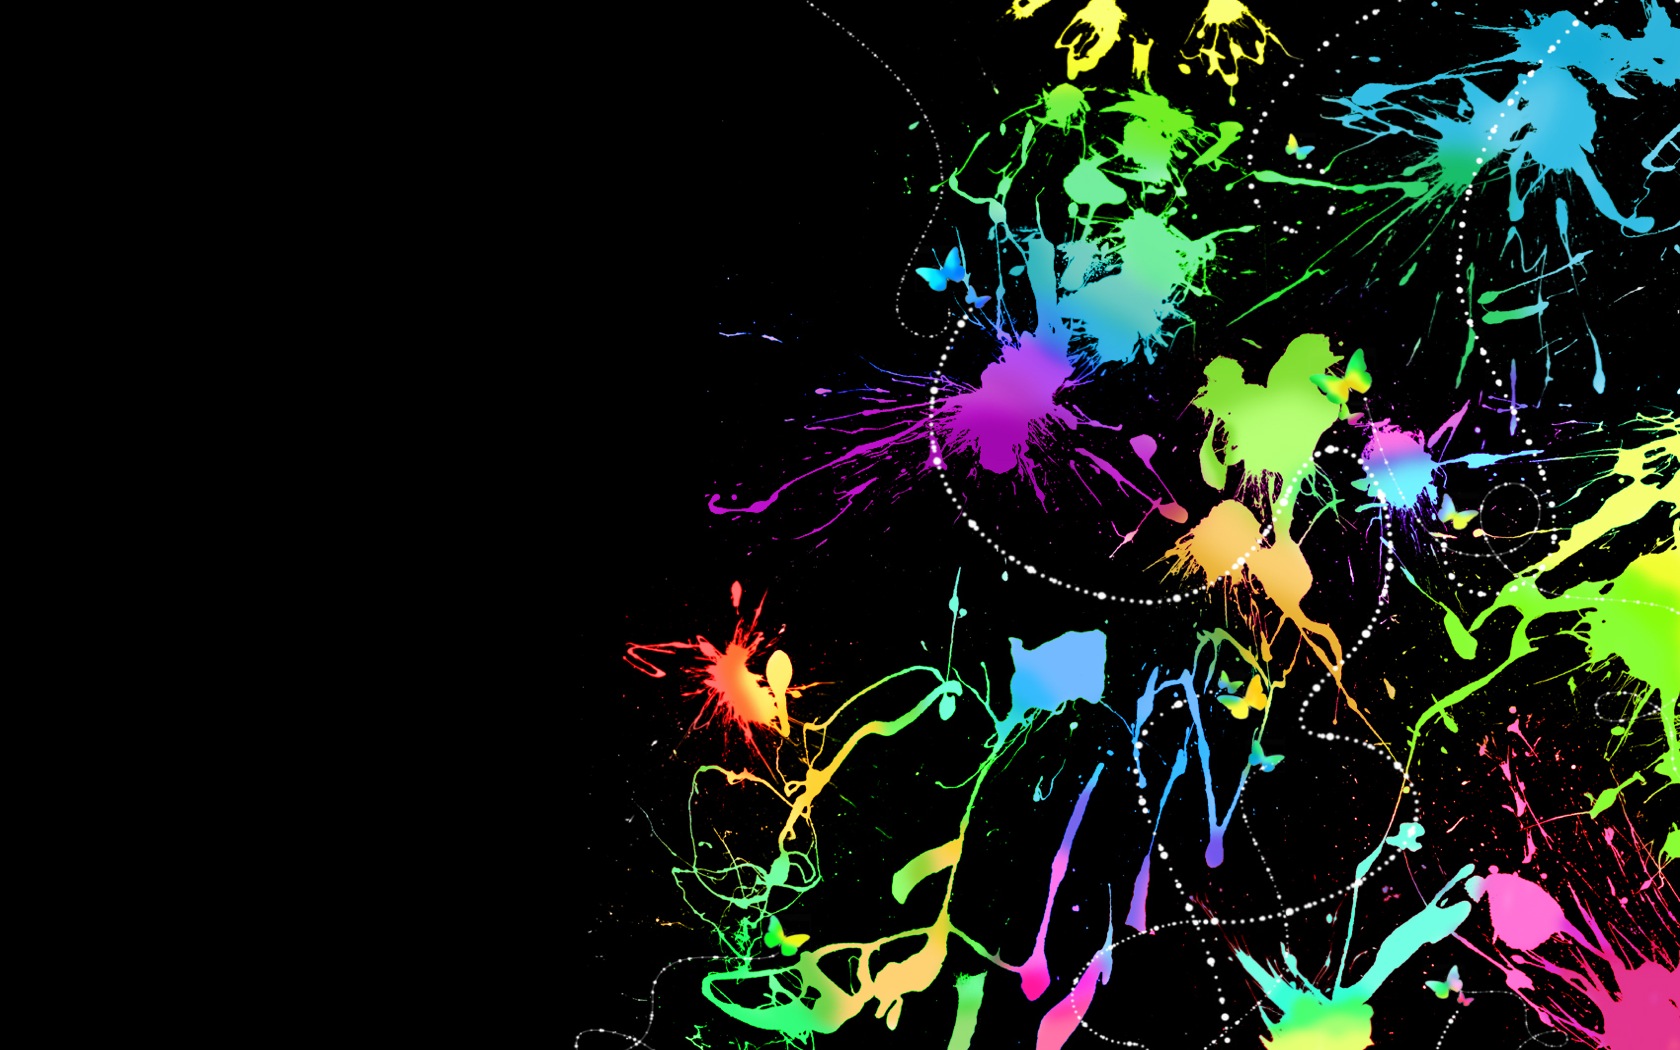  46 Colorful  Wallpaper  with Black  Background  on 